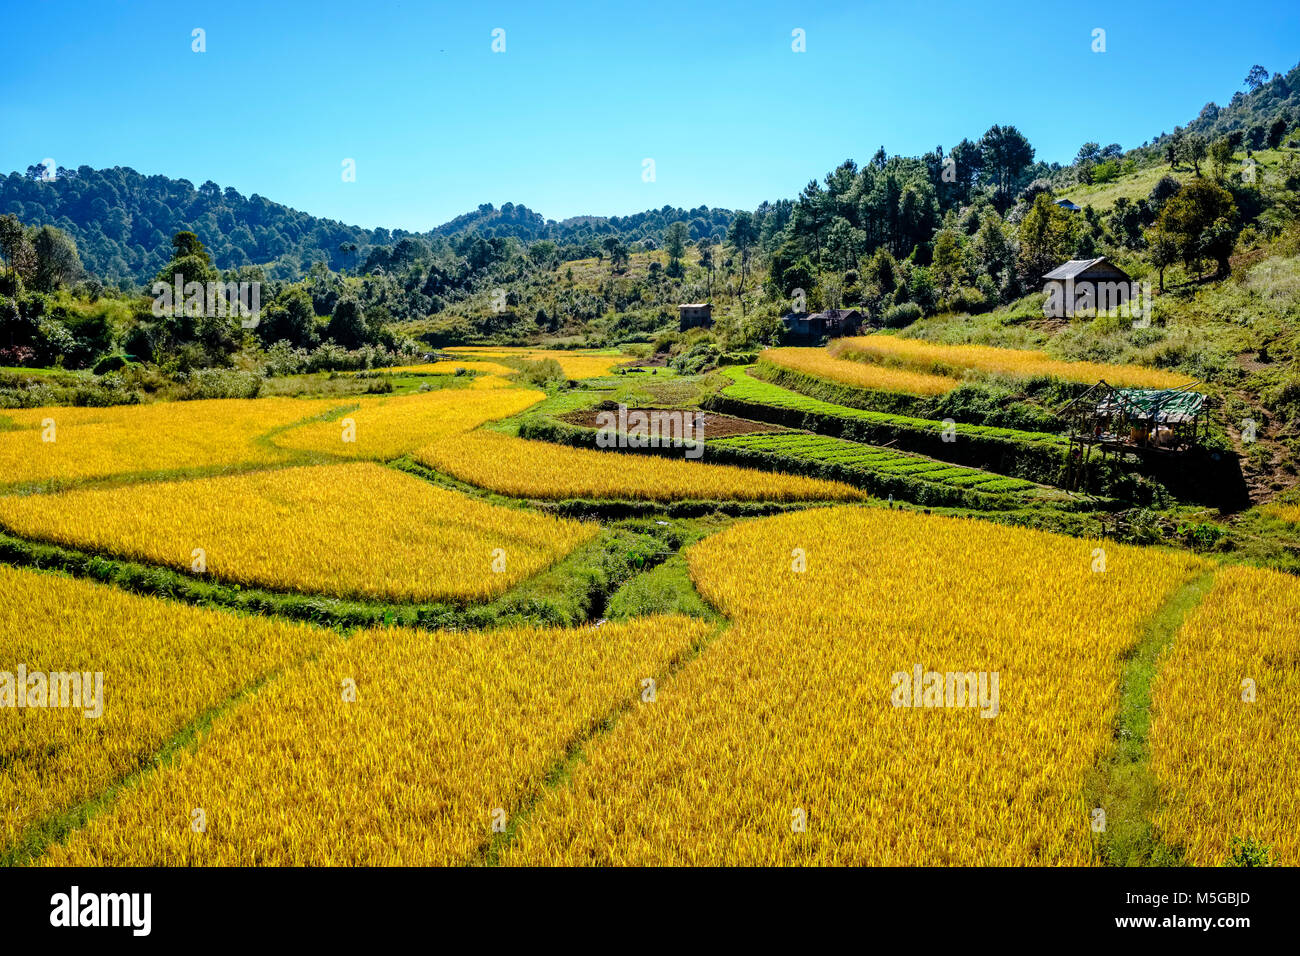 Agricultural landscape with rice fields in the area of the Palaung hill tribe Stock Photo